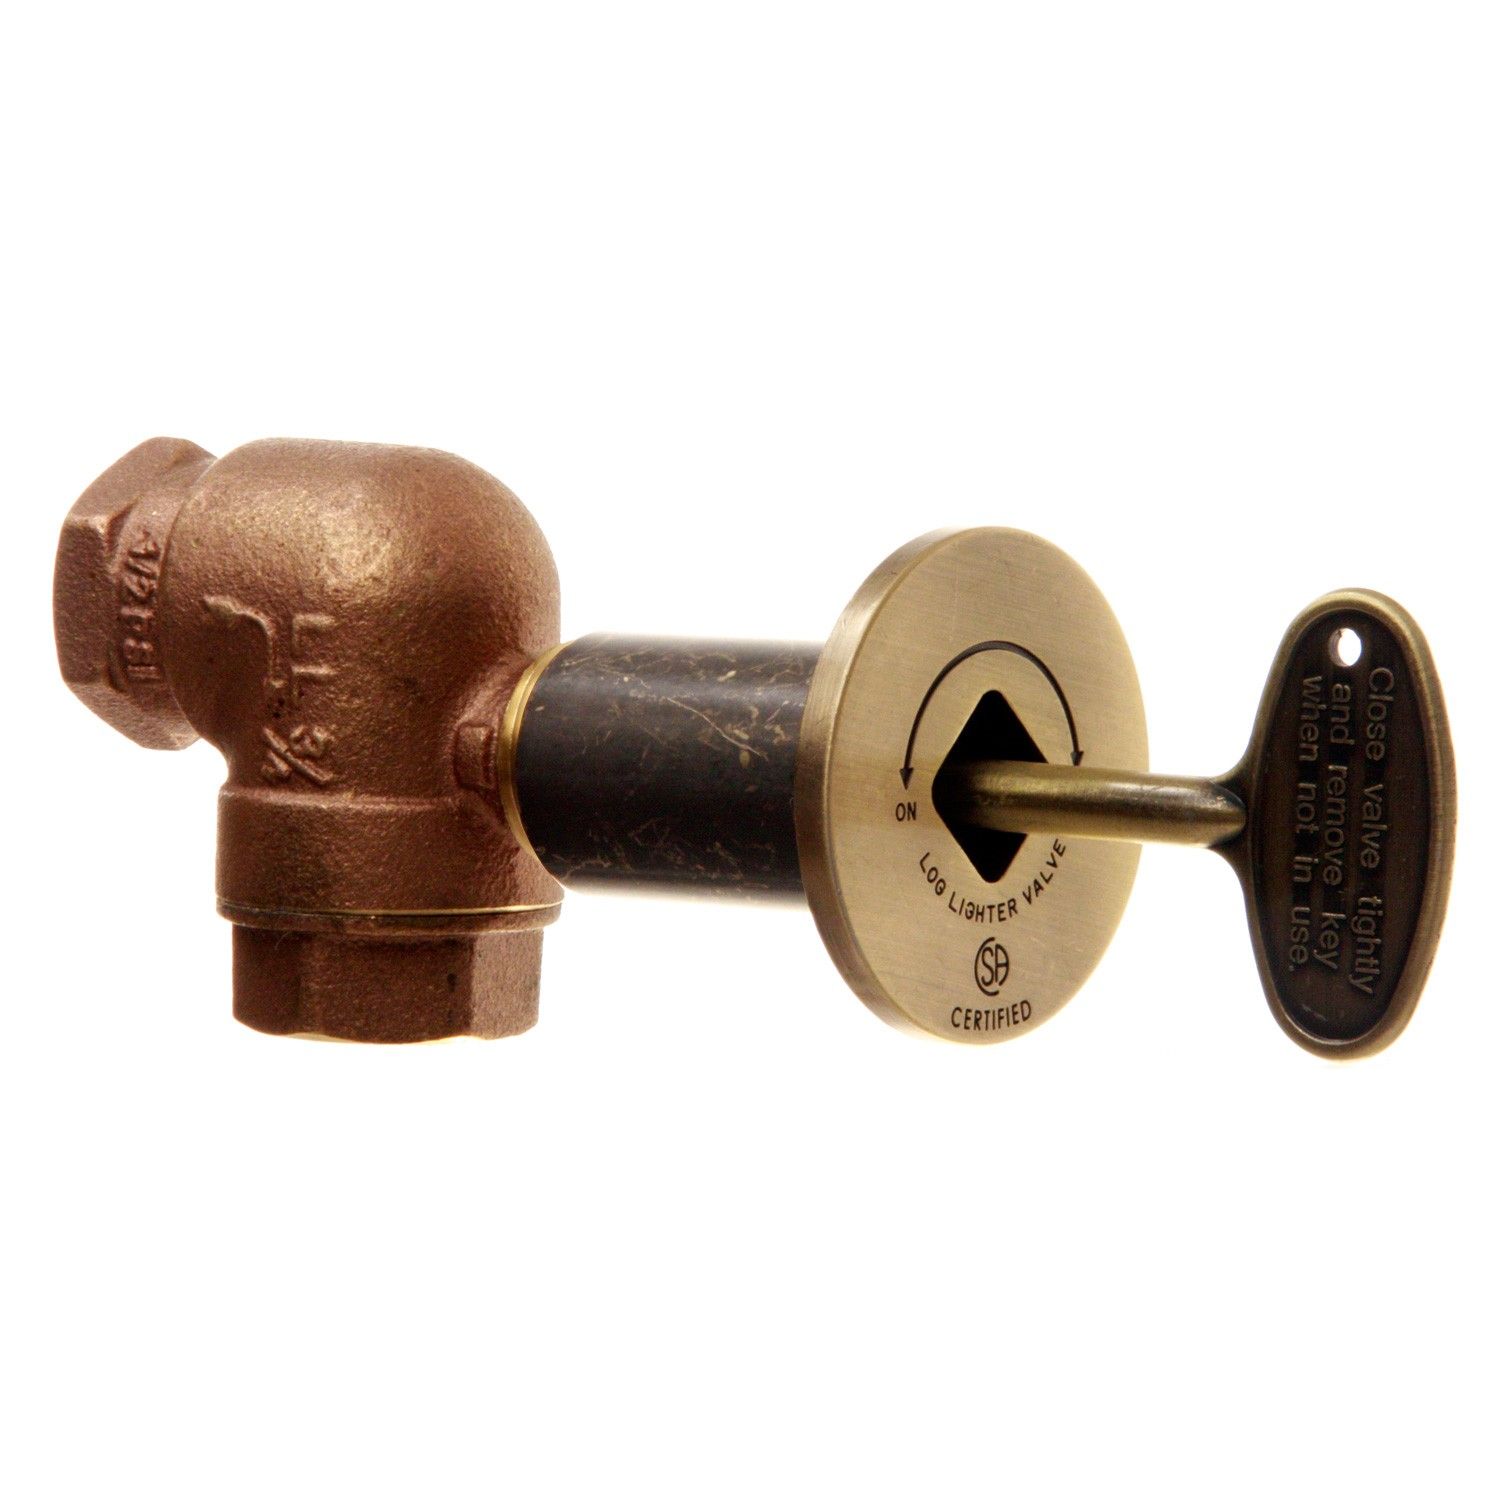 Universal 3-Inch Gas Valve Key Fits 1/4" And 5/16" Turn Ball For Fire Pits 